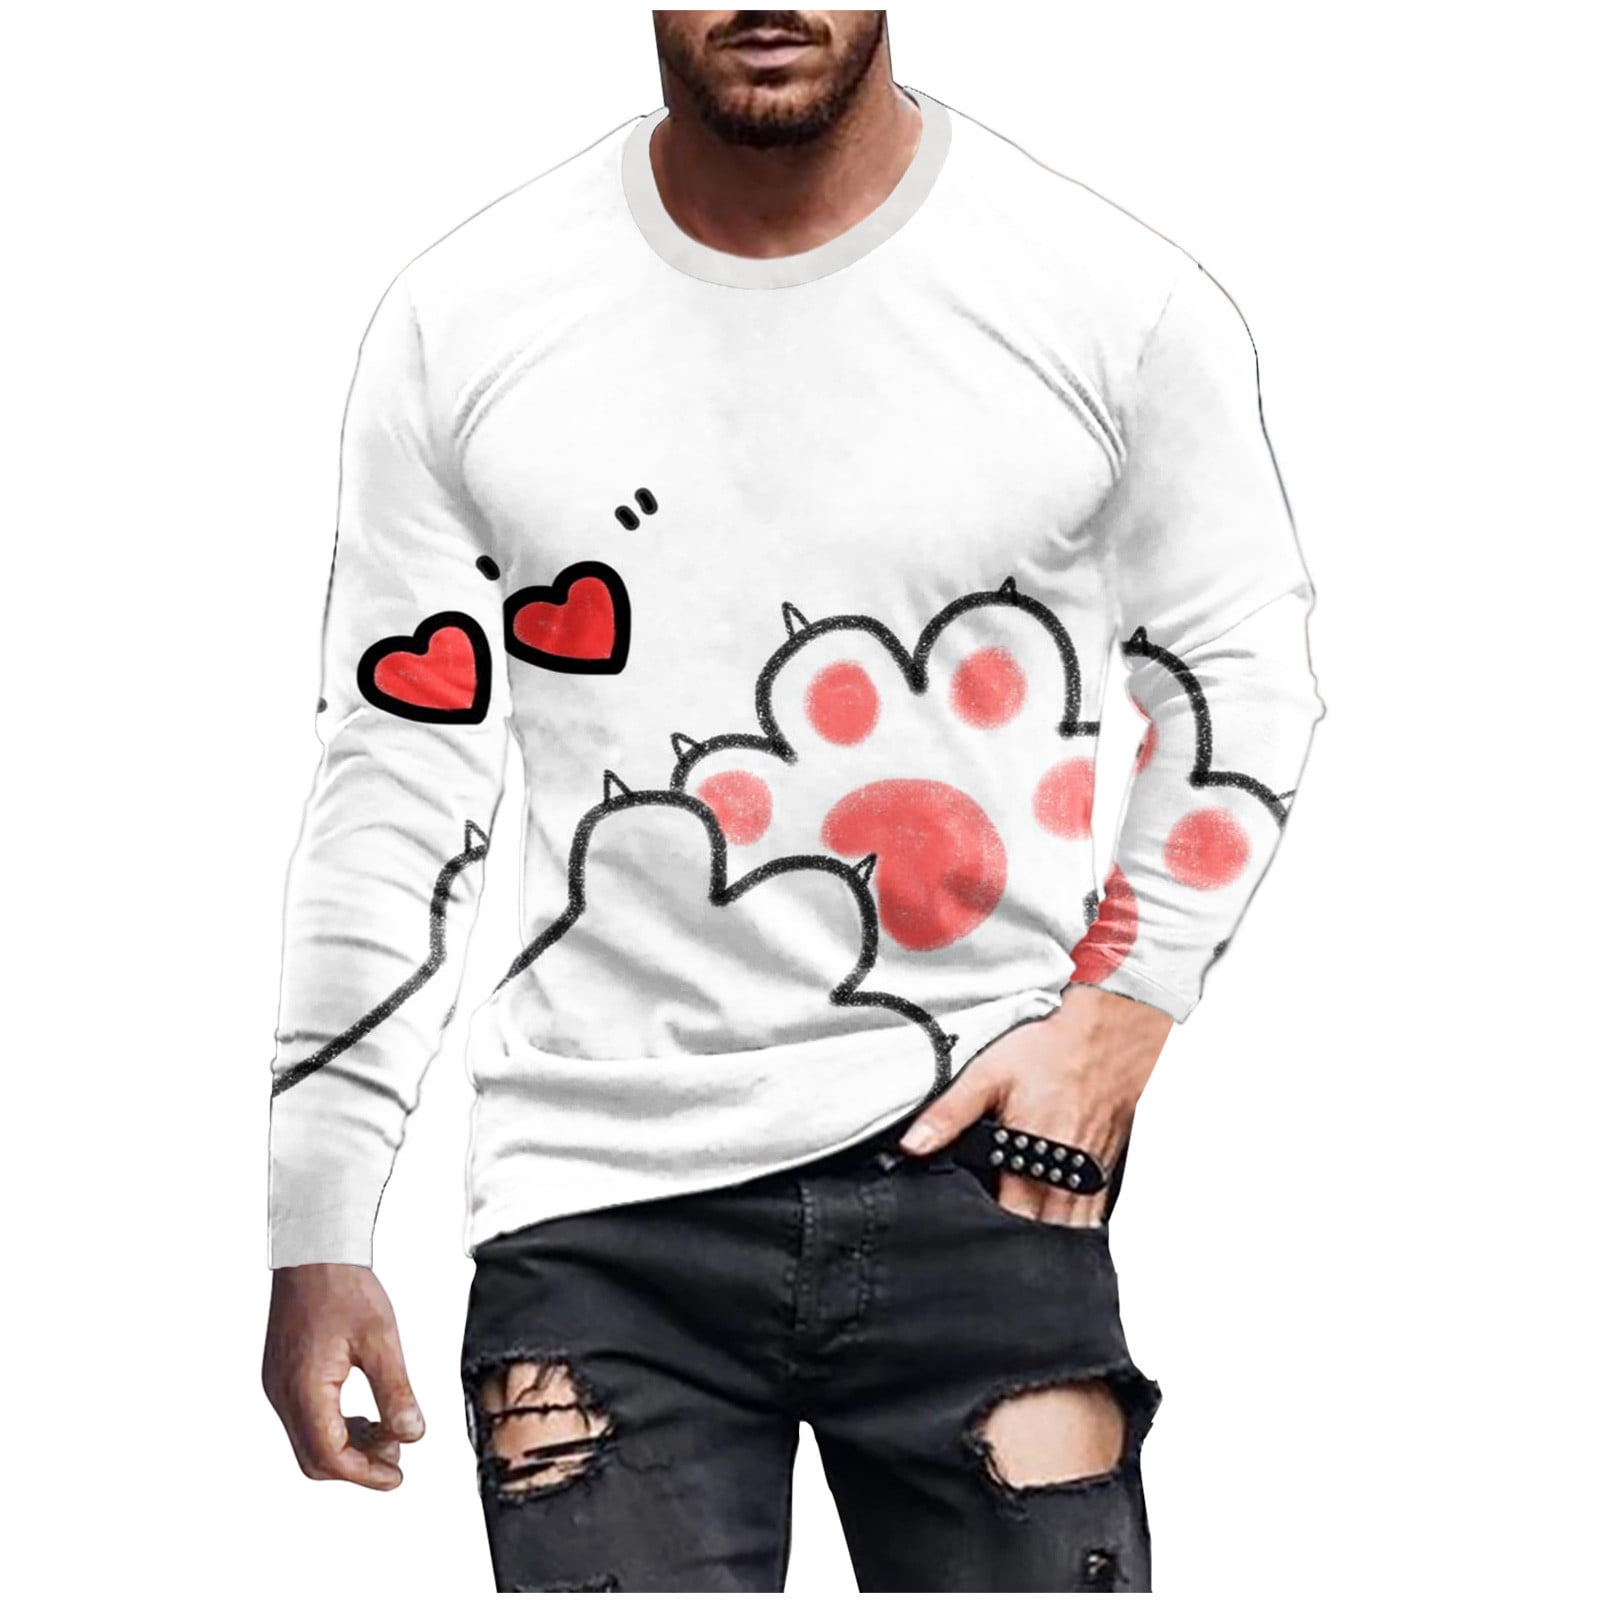 YYDGH 3D Shirt for Men Heart Graphic Print Long Sleeve Cool Funny